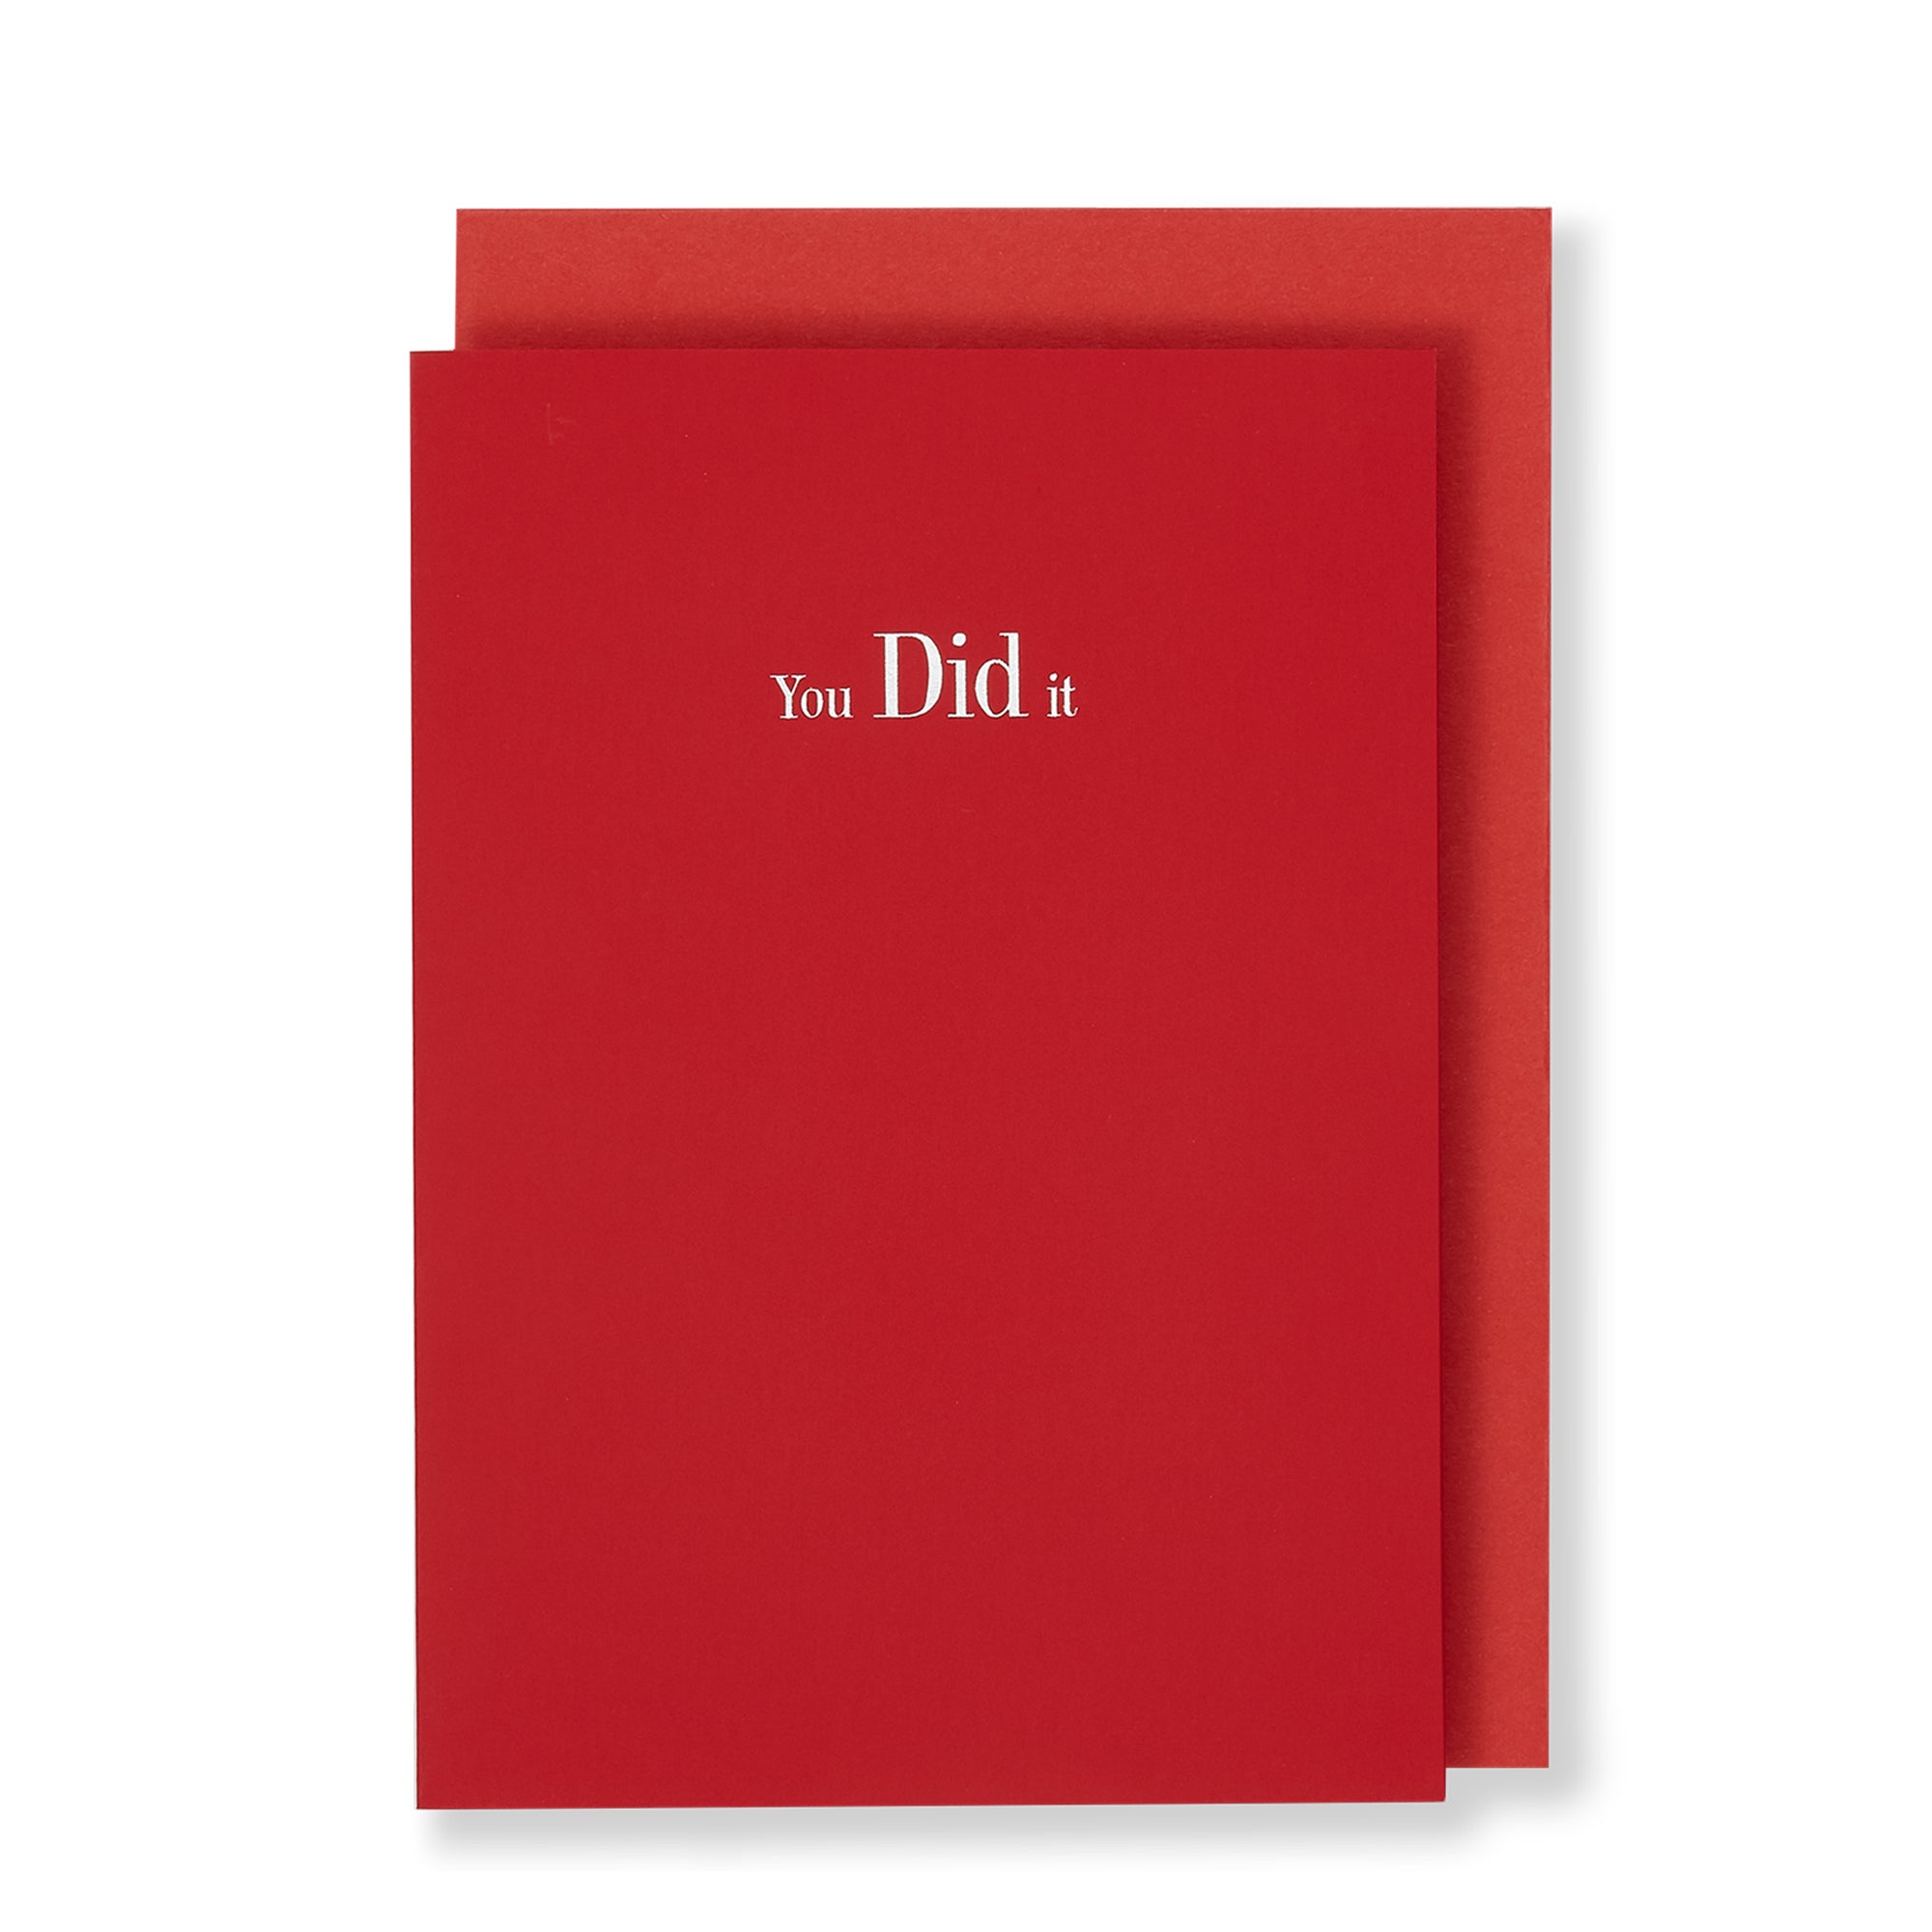 You Did It Greeting Card in Bright Red, Front